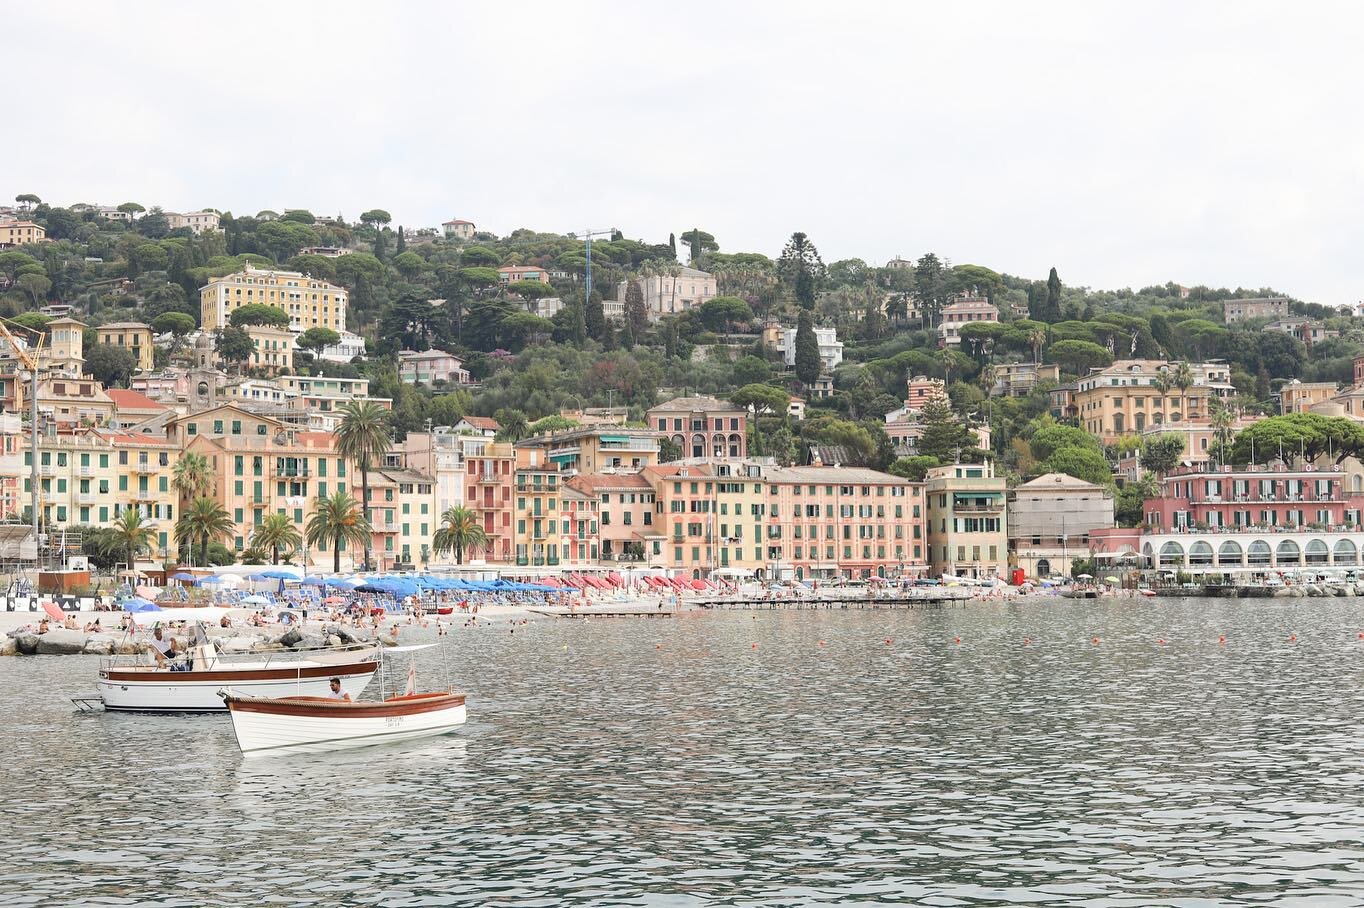 Ensconced within lush hills, Santa Margherita or &ldquo;Santa&rdquo; possesses this wonderful lively allure! Colourful villas, dotted with ornamental gardens, a spirited promenade, charming piazzas, and well of course prime positioning next to the Li